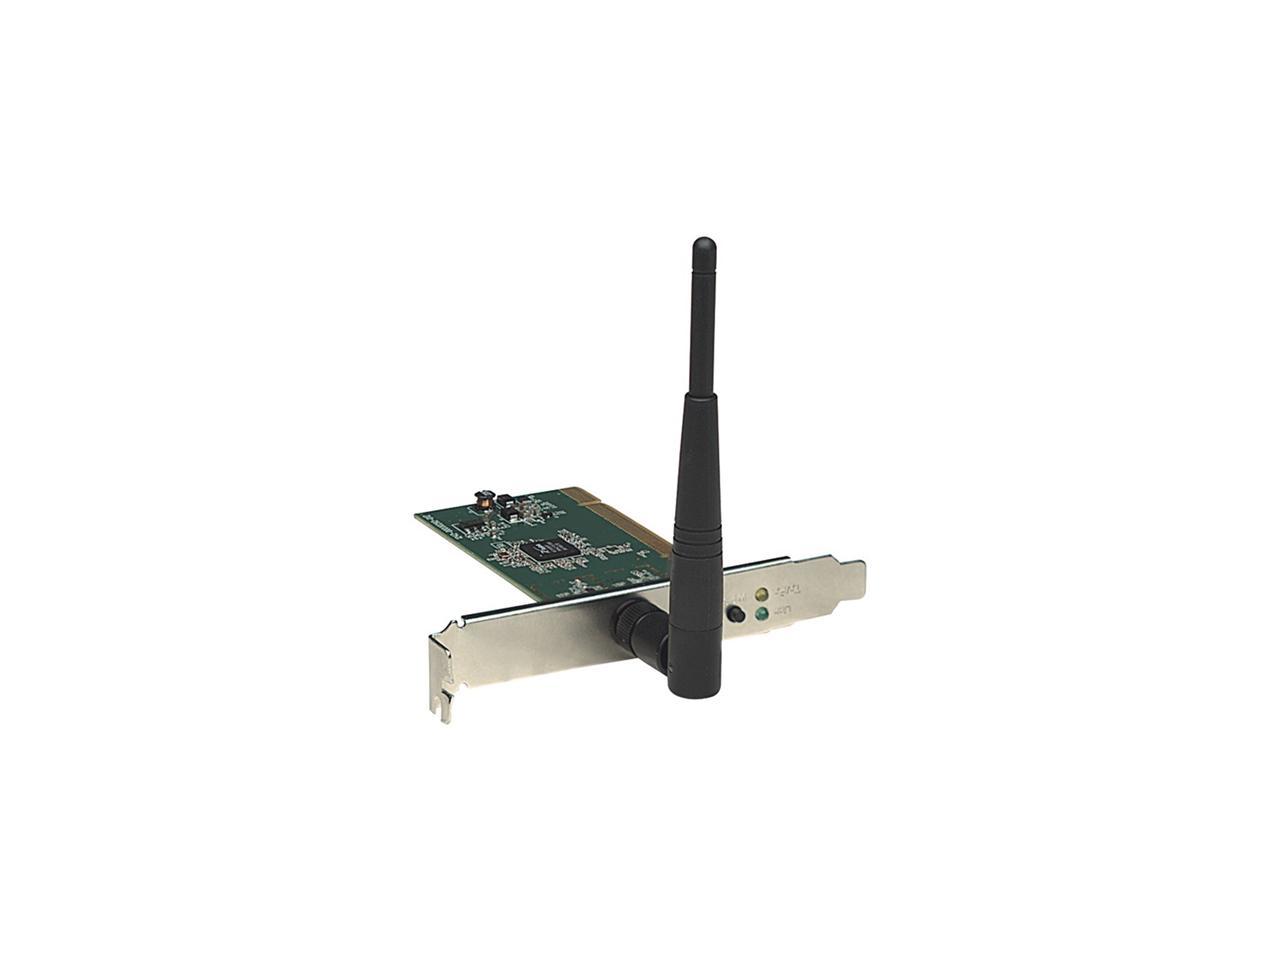 Intellinet Wireless 150N PCI Card 524810 with Antenna 